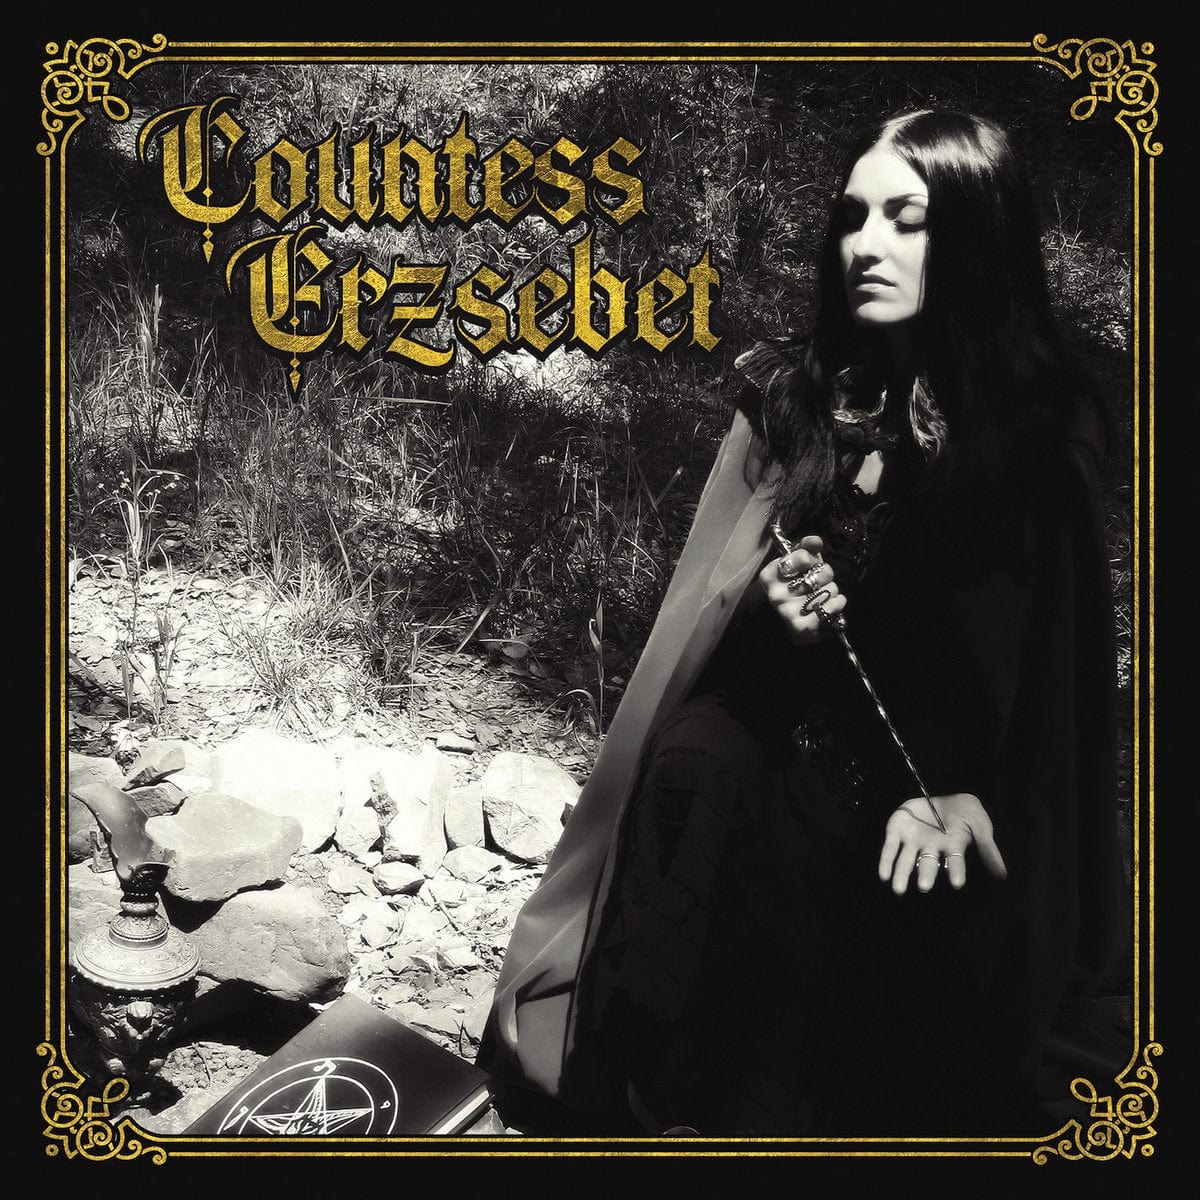 Self-released CD Countess Erzsebet "The Countess Erzsebet" CD